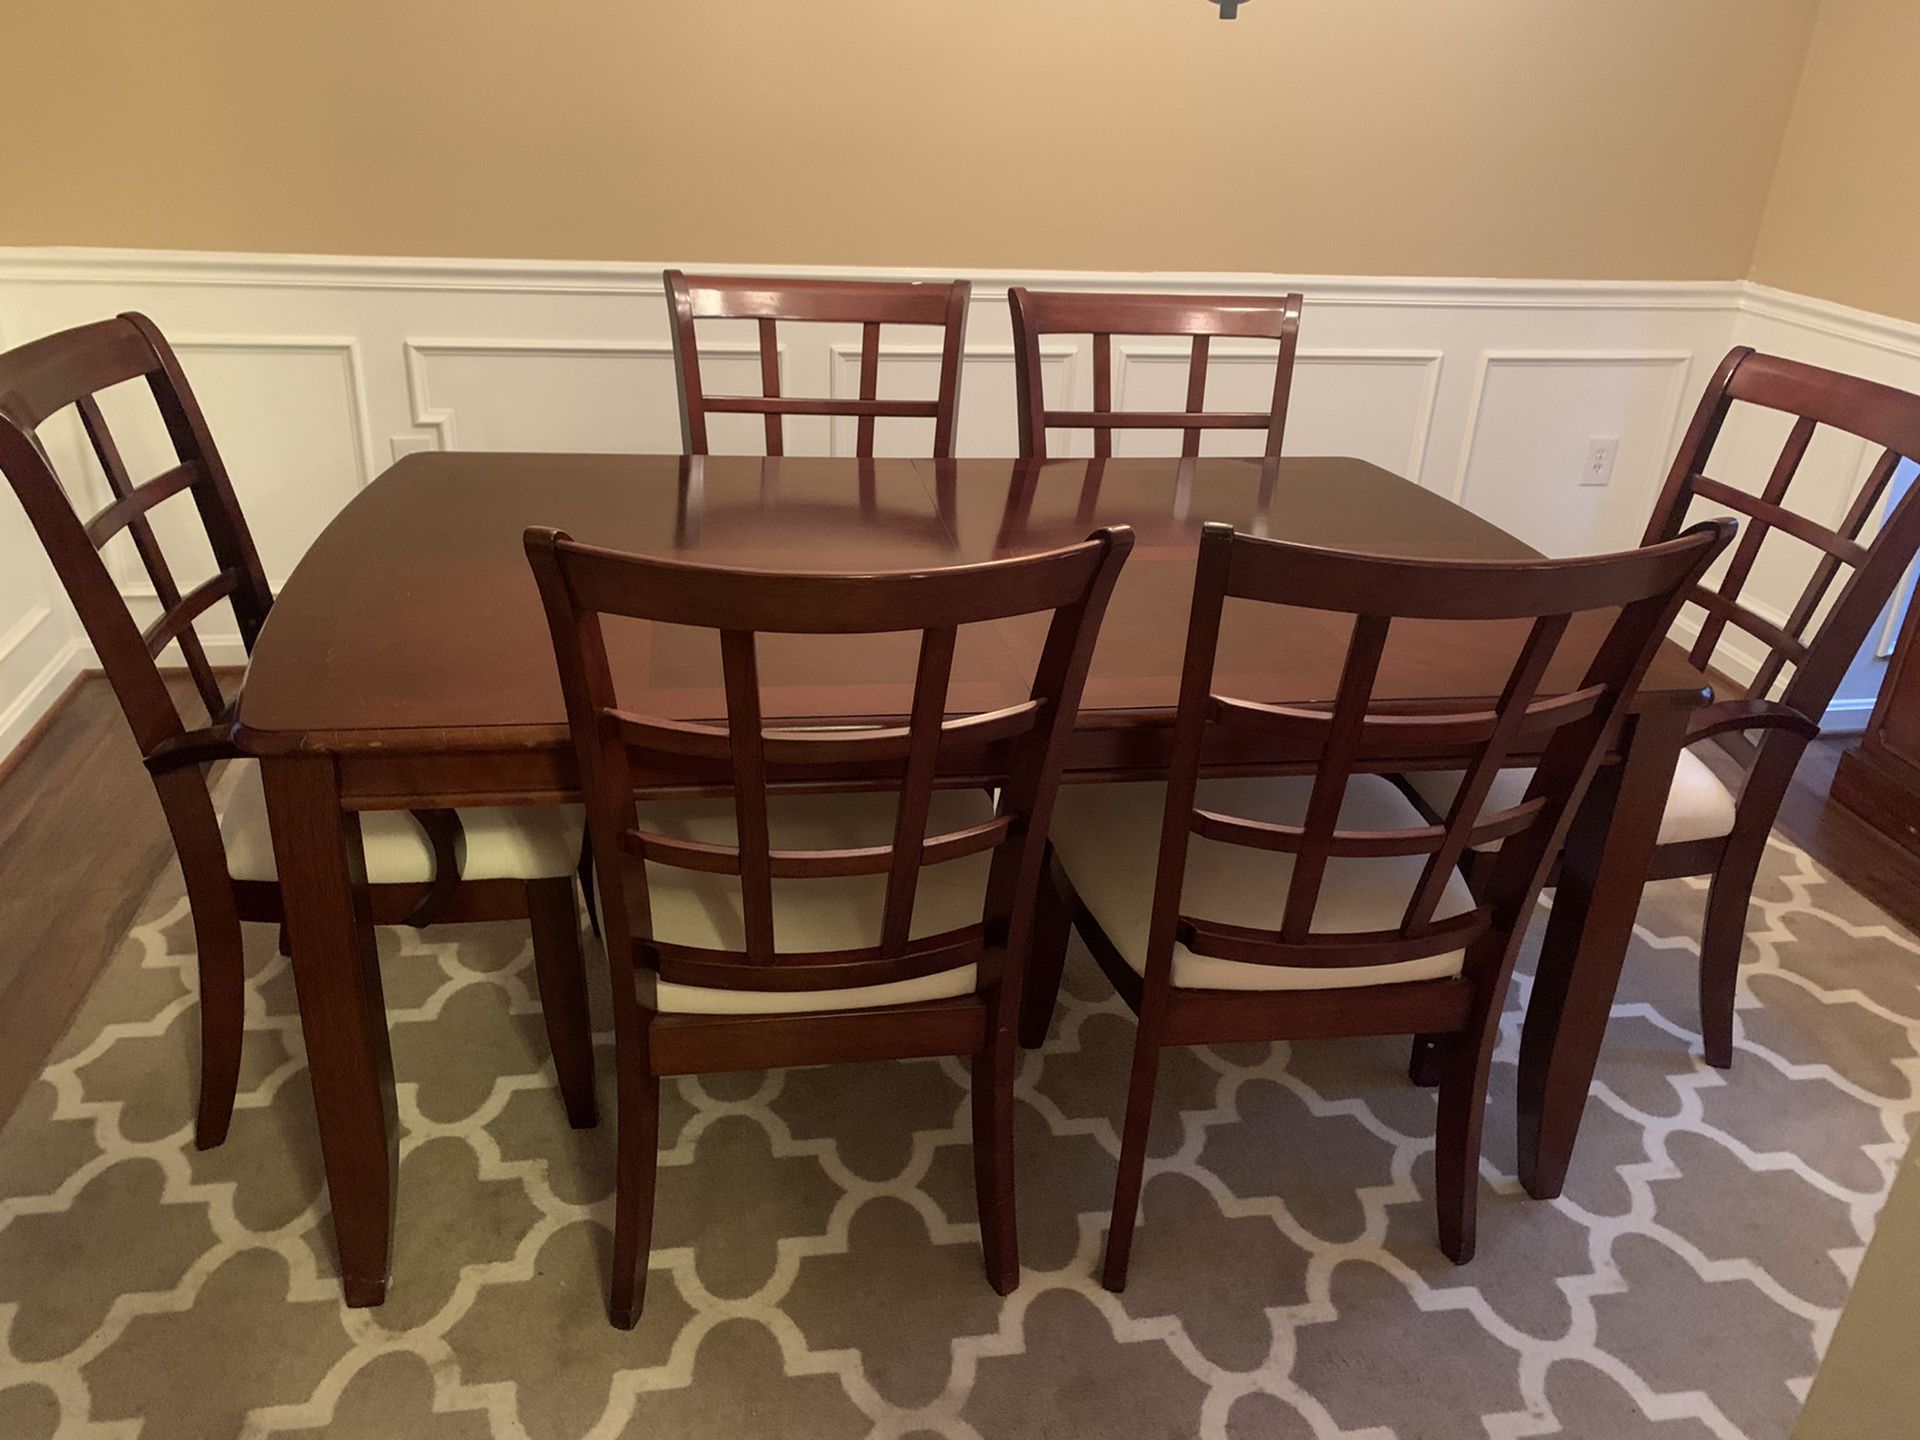 Dining table, 6 chairs, and leaf